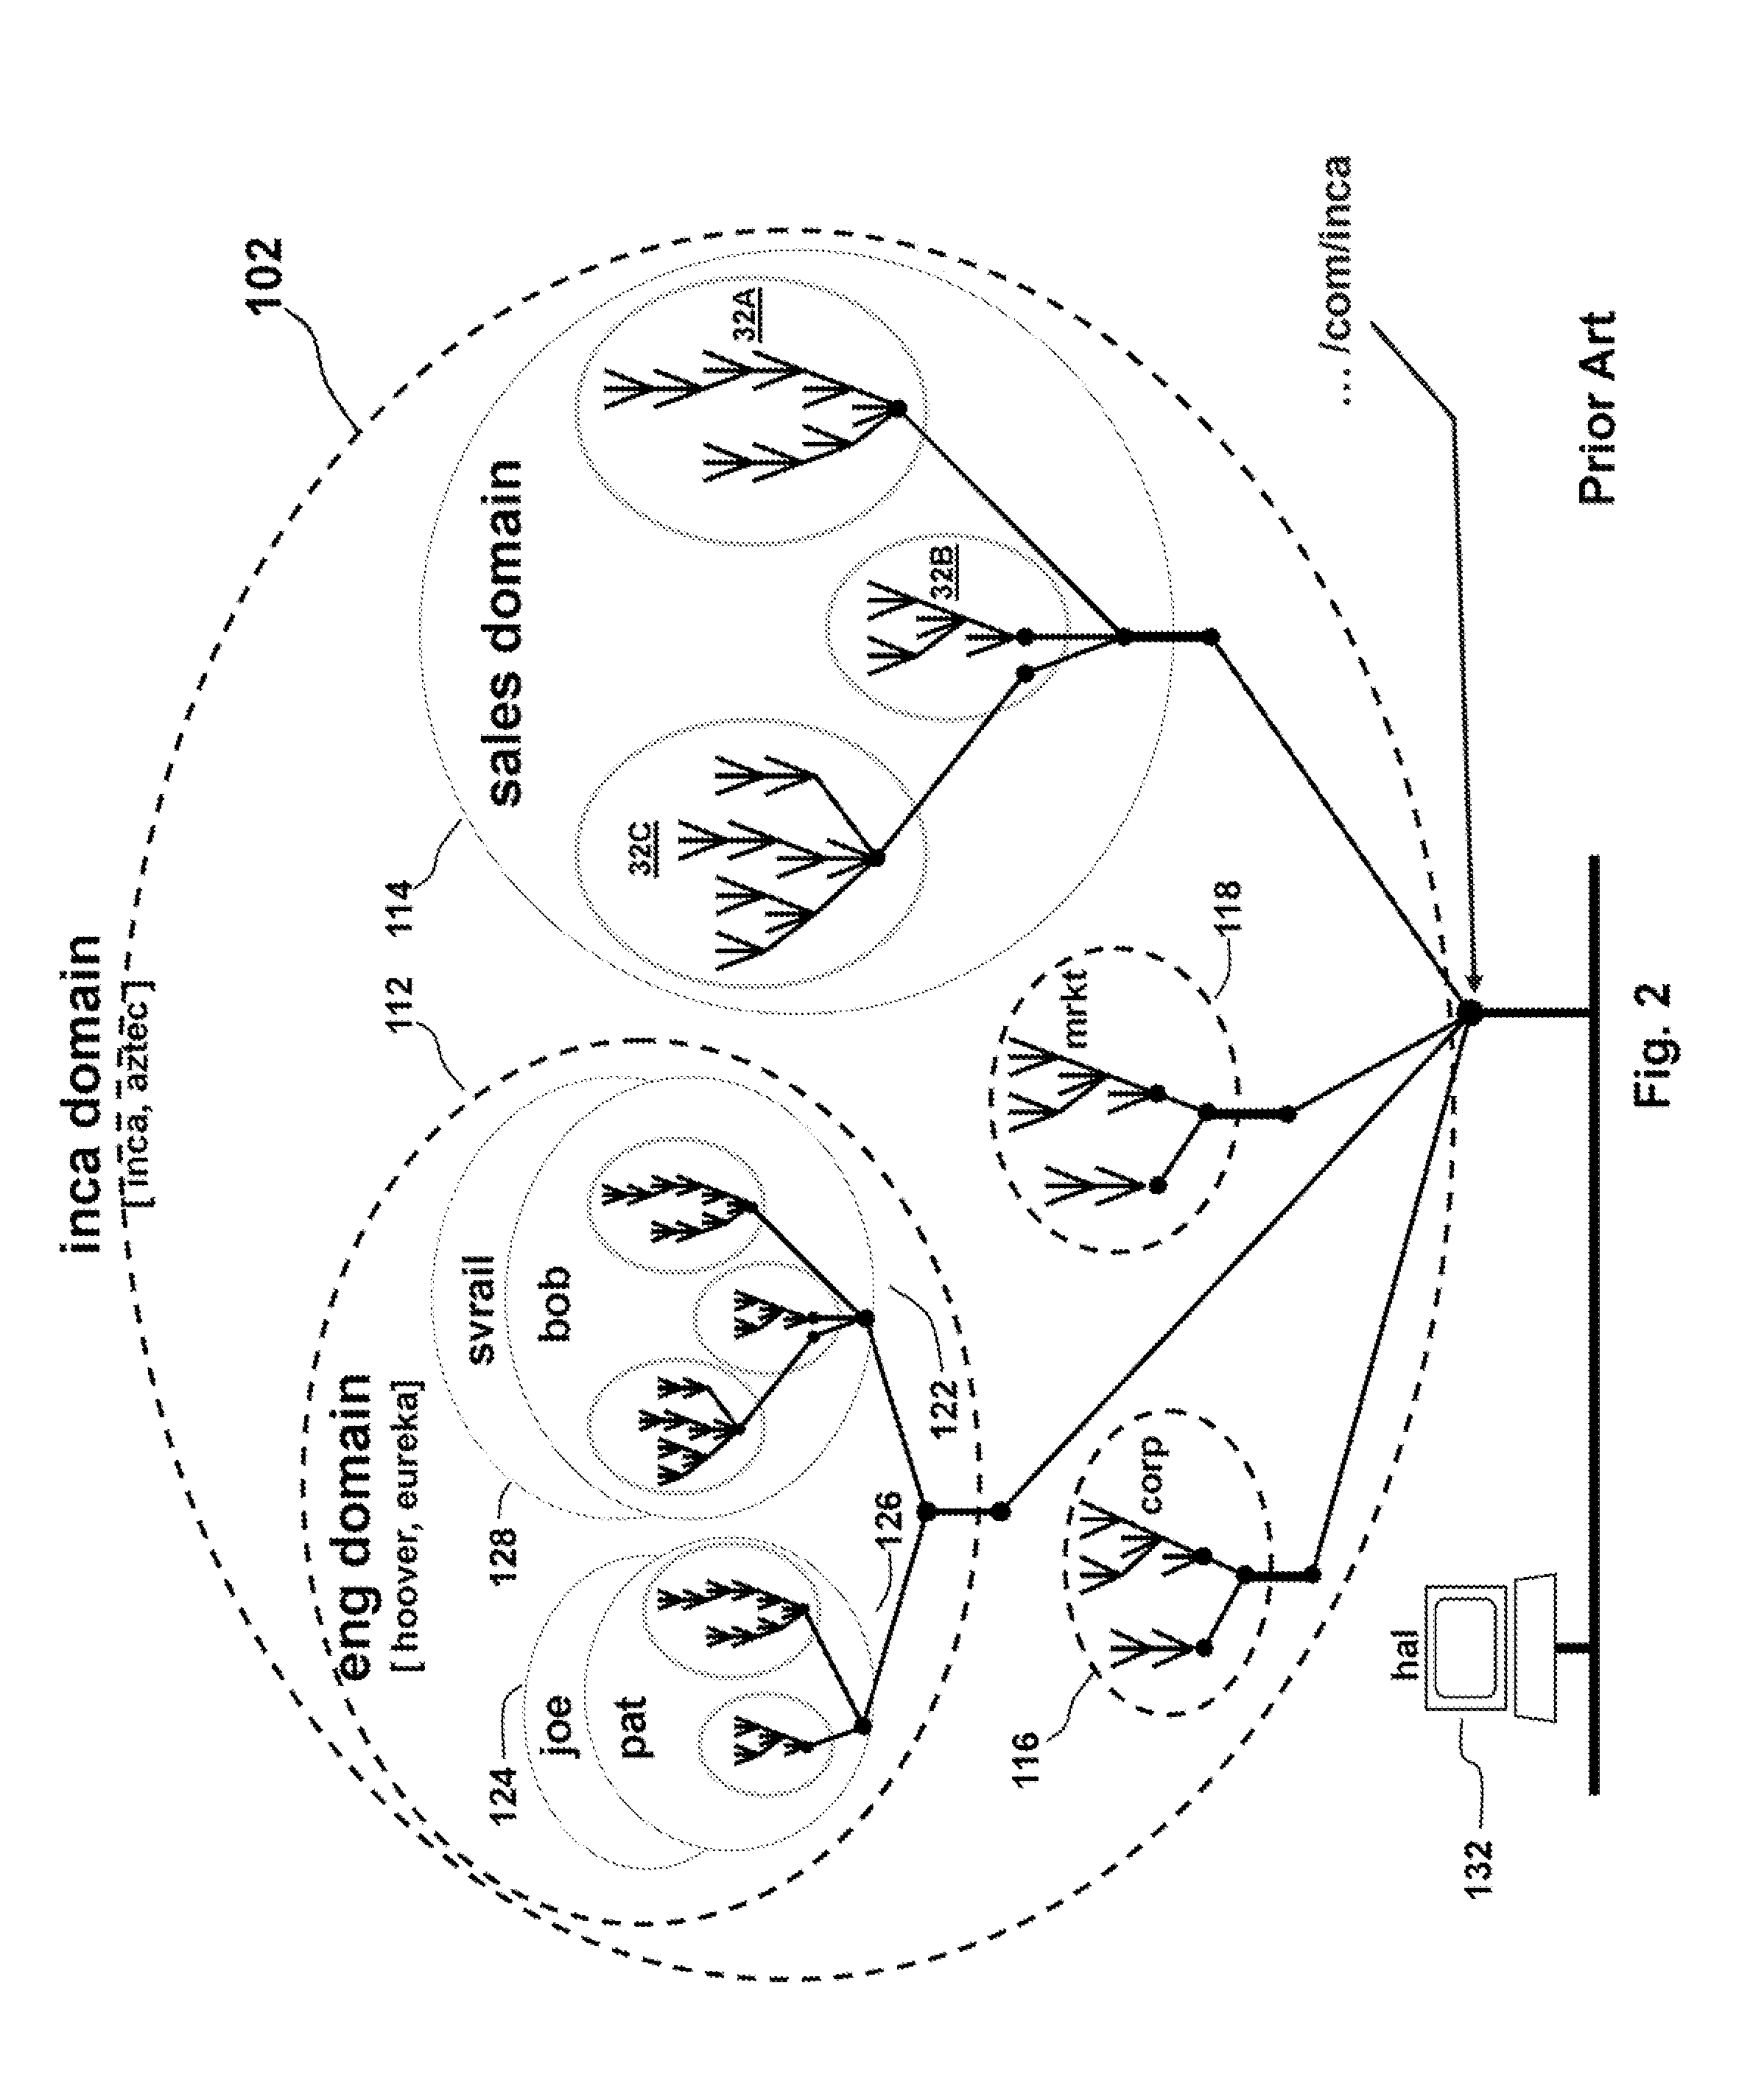 Distributed File System Consistency Mechanism Extension for Enabling Internet Video Broadcasting